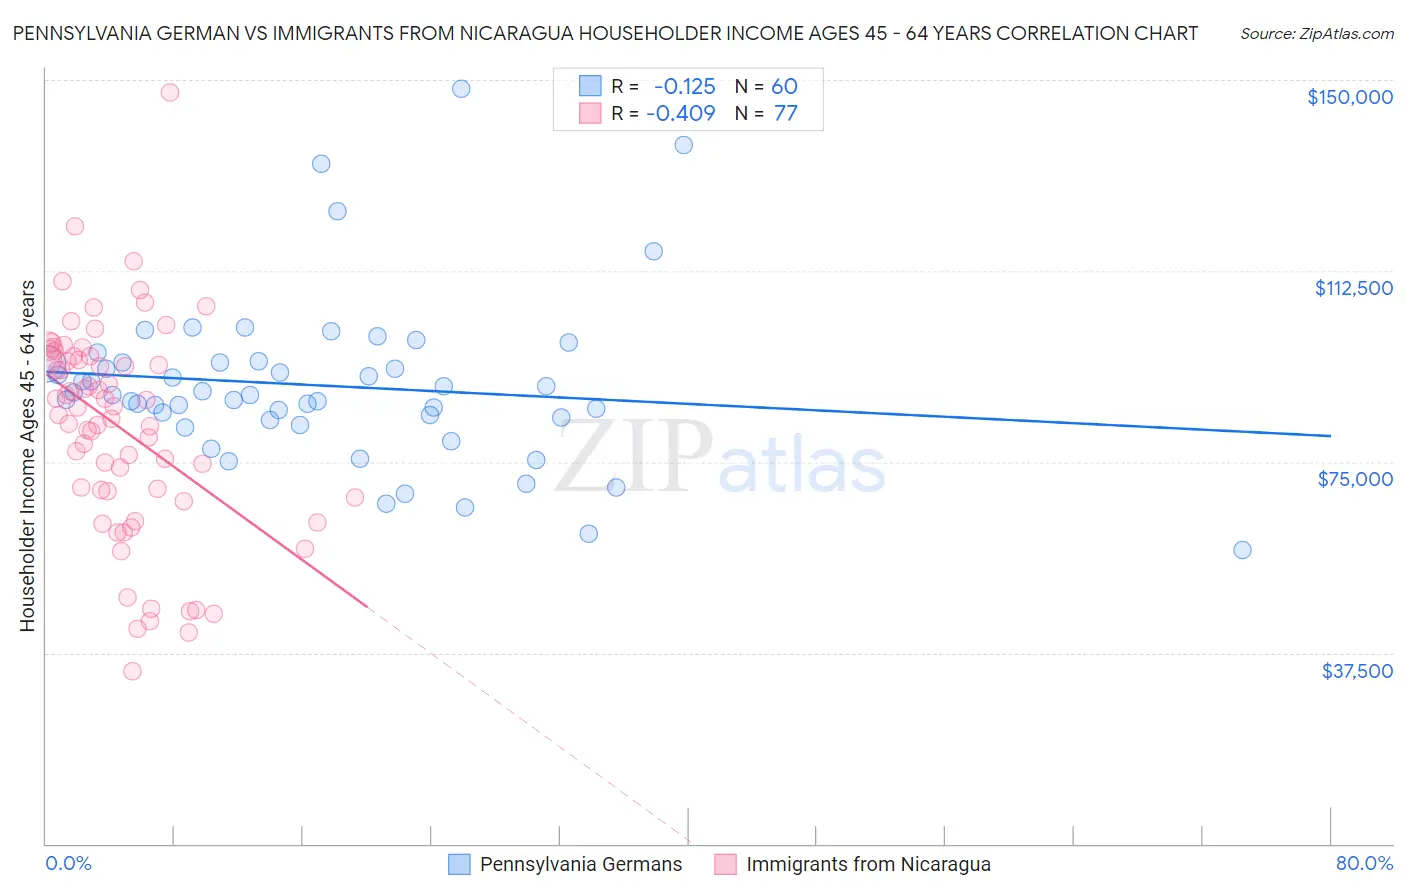 Pennsylvania German vs Immigrants from Nicaragua Householder Income Ages 45 - 64 years